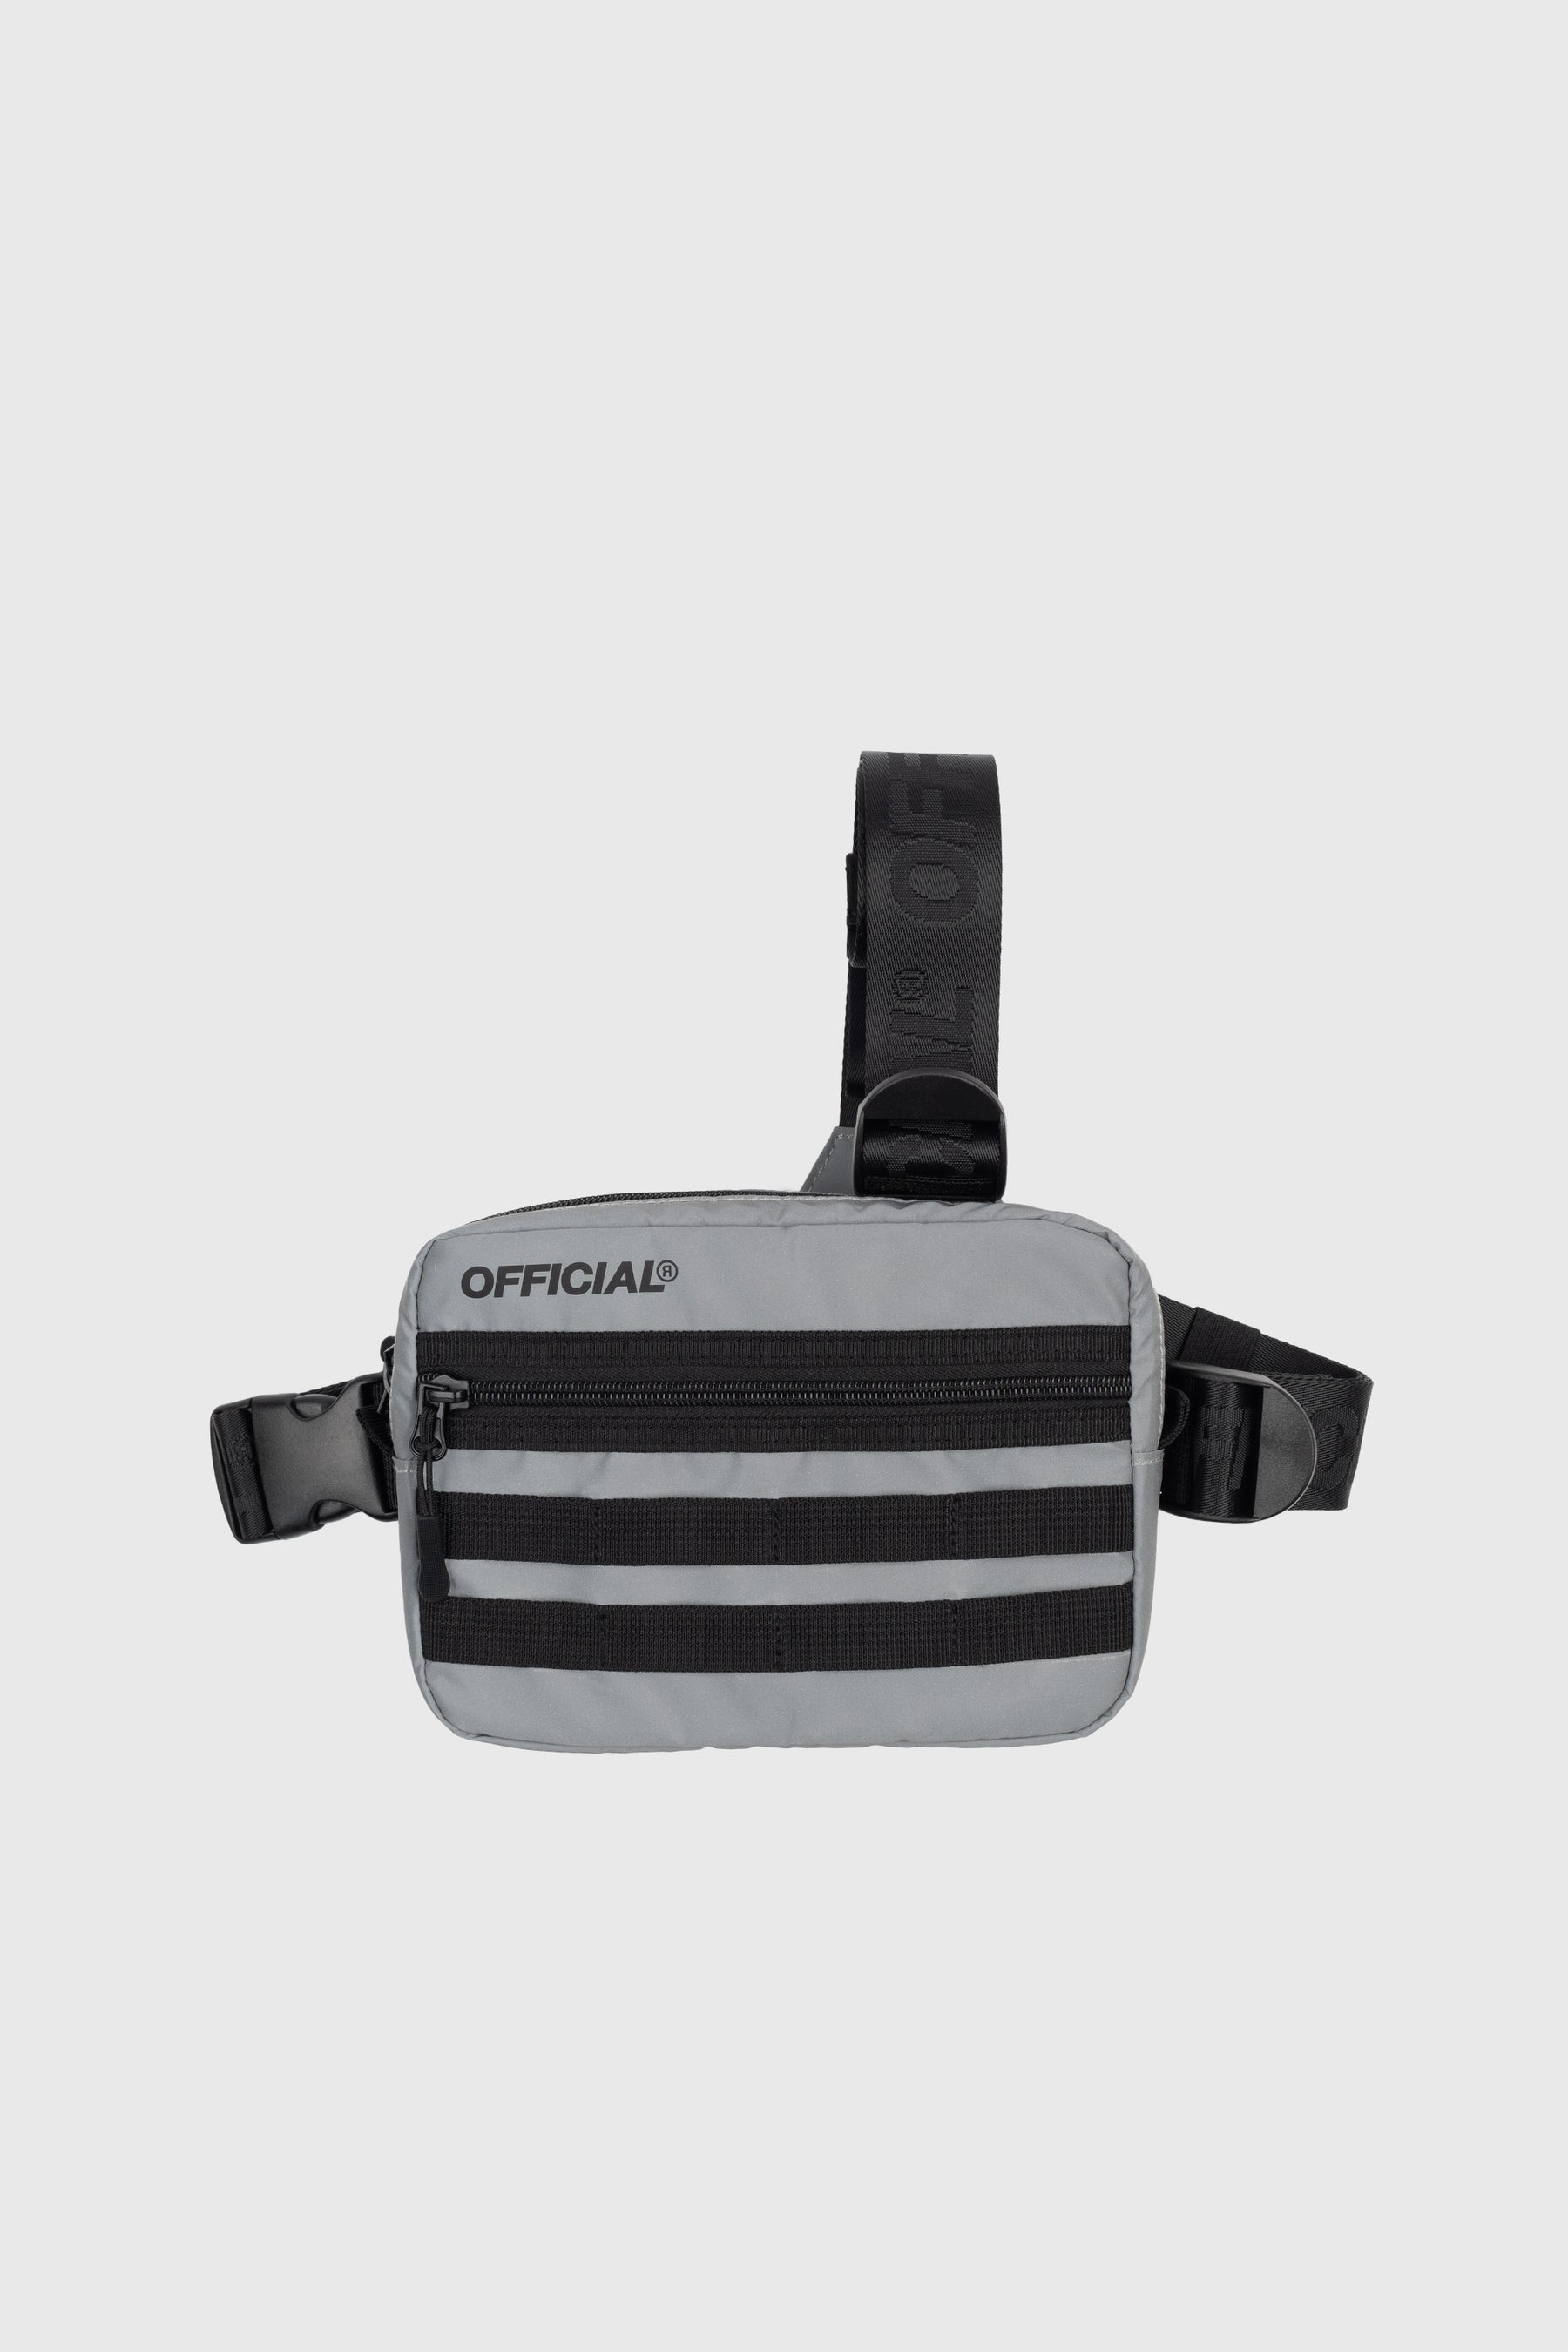 Rainbow Reflective Tri-Strap Chest Bag - The Official Brand